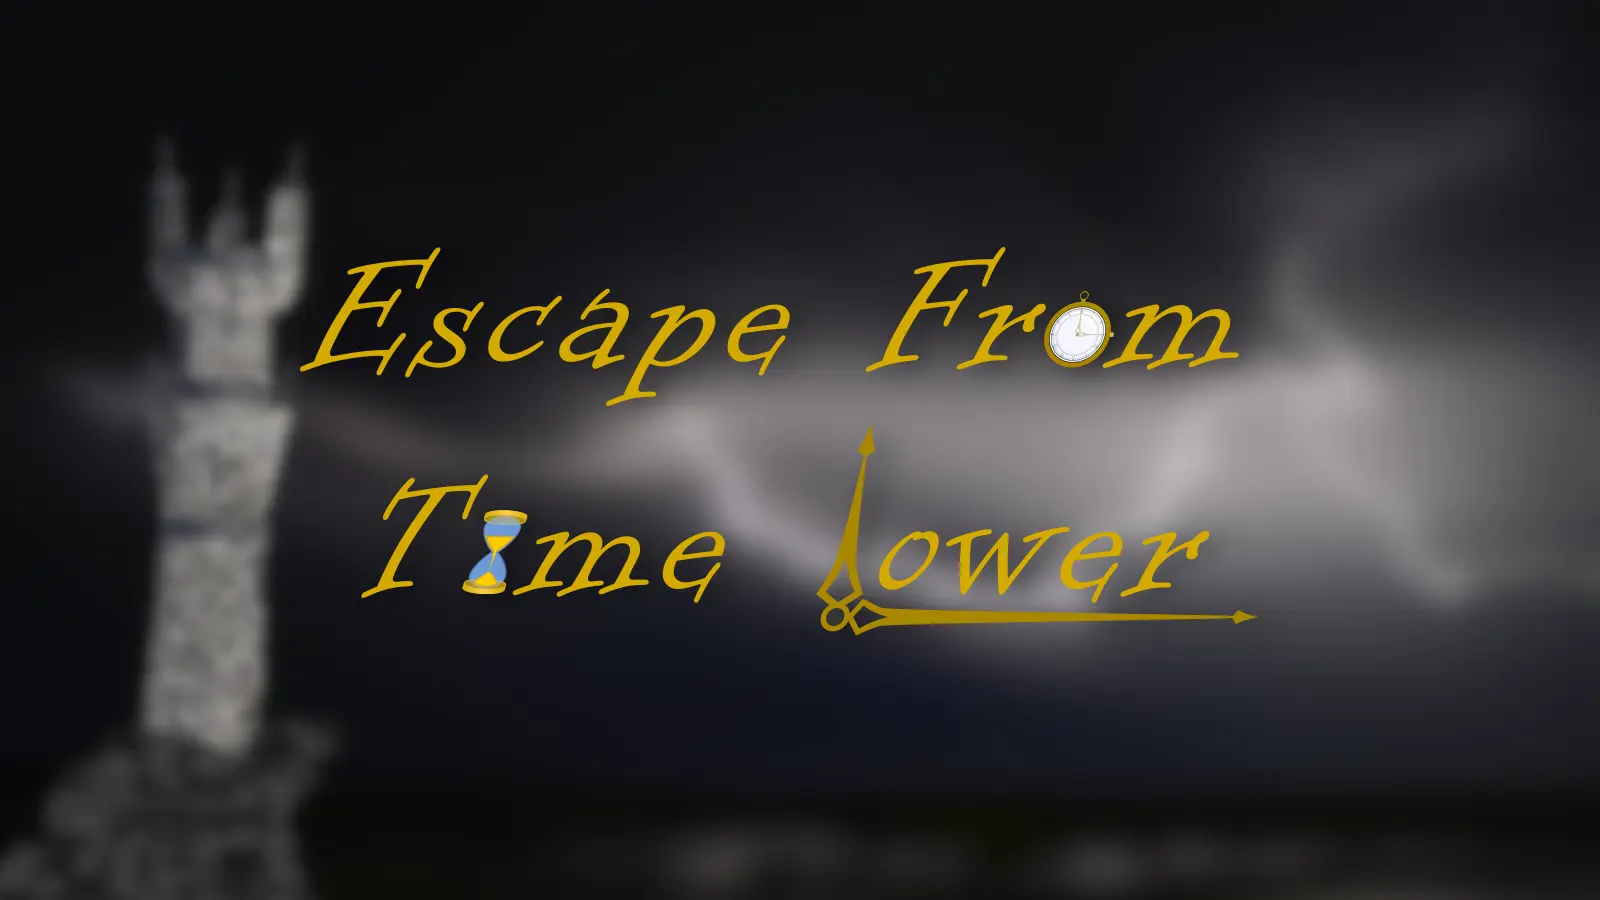 Escape from Time Tower